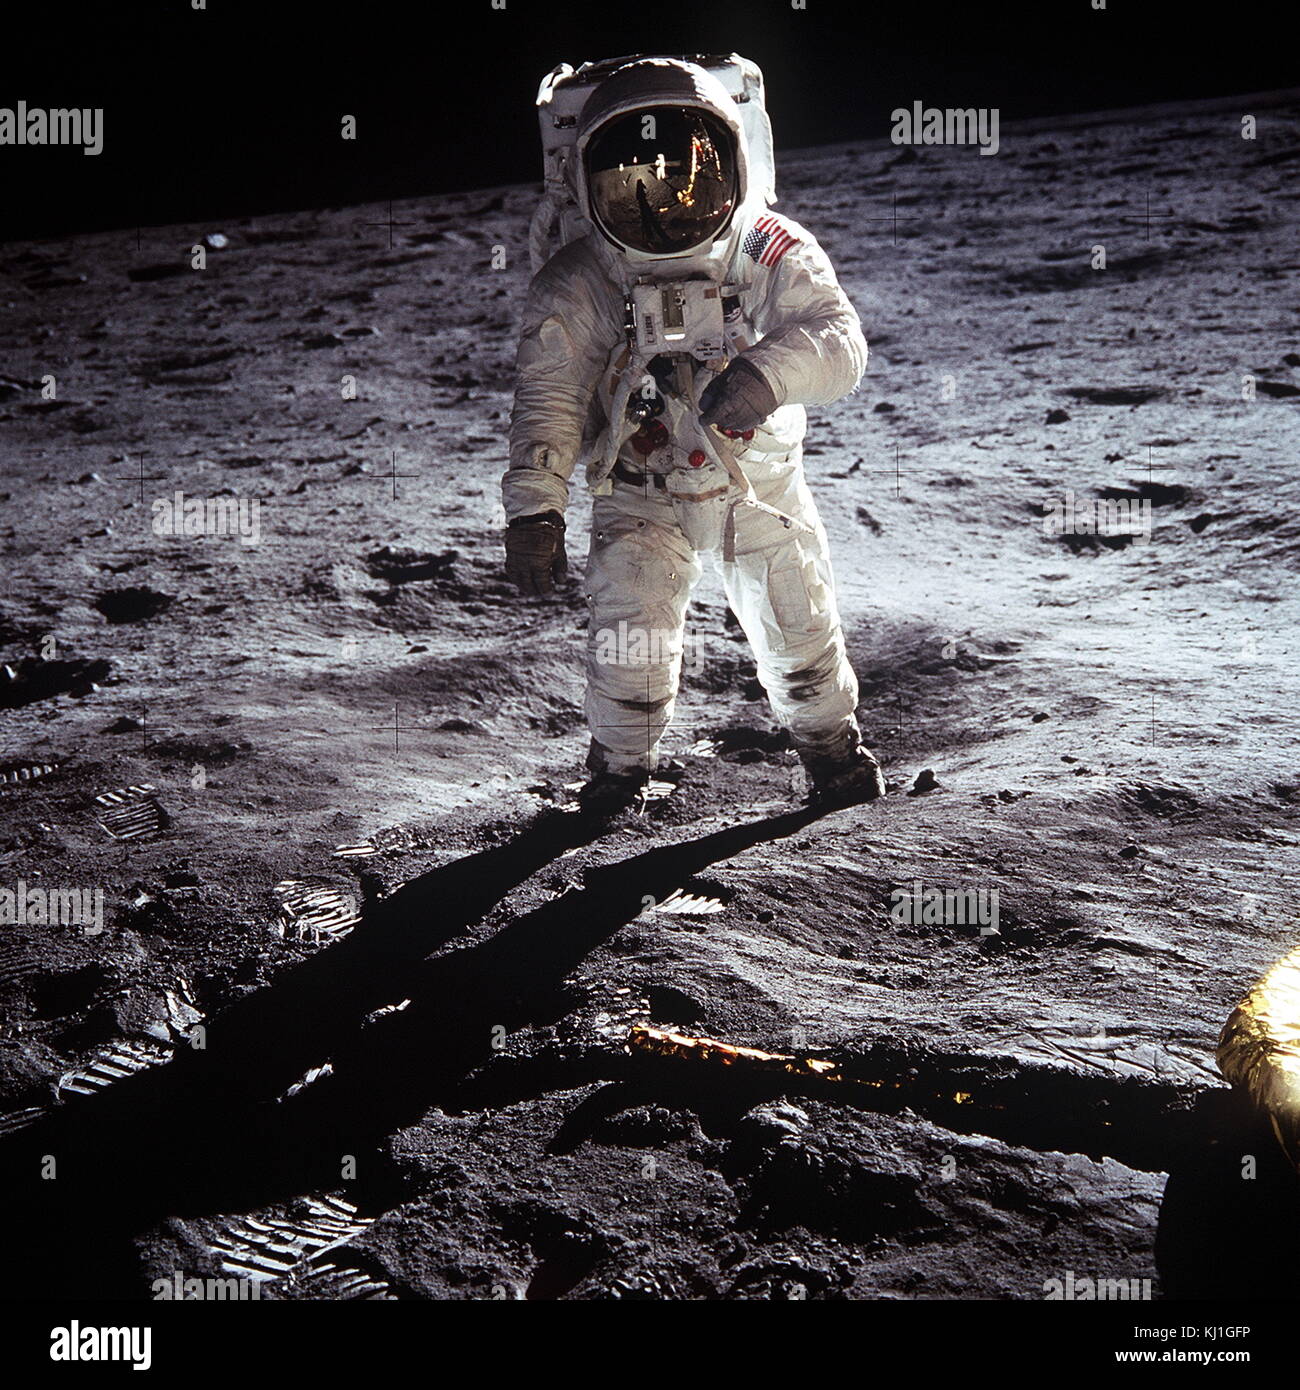 Astronaut Buzz Aldrin, lunar module pilot, stands on the surface of the moon near the leg of the lunar module, Eagle, during the Apollo 11 moonwalk. Astronaut Neil Armstrong, mission commander, took this photograph with a 70mm lunar surface camera. 21st July 1969 Stock Photo